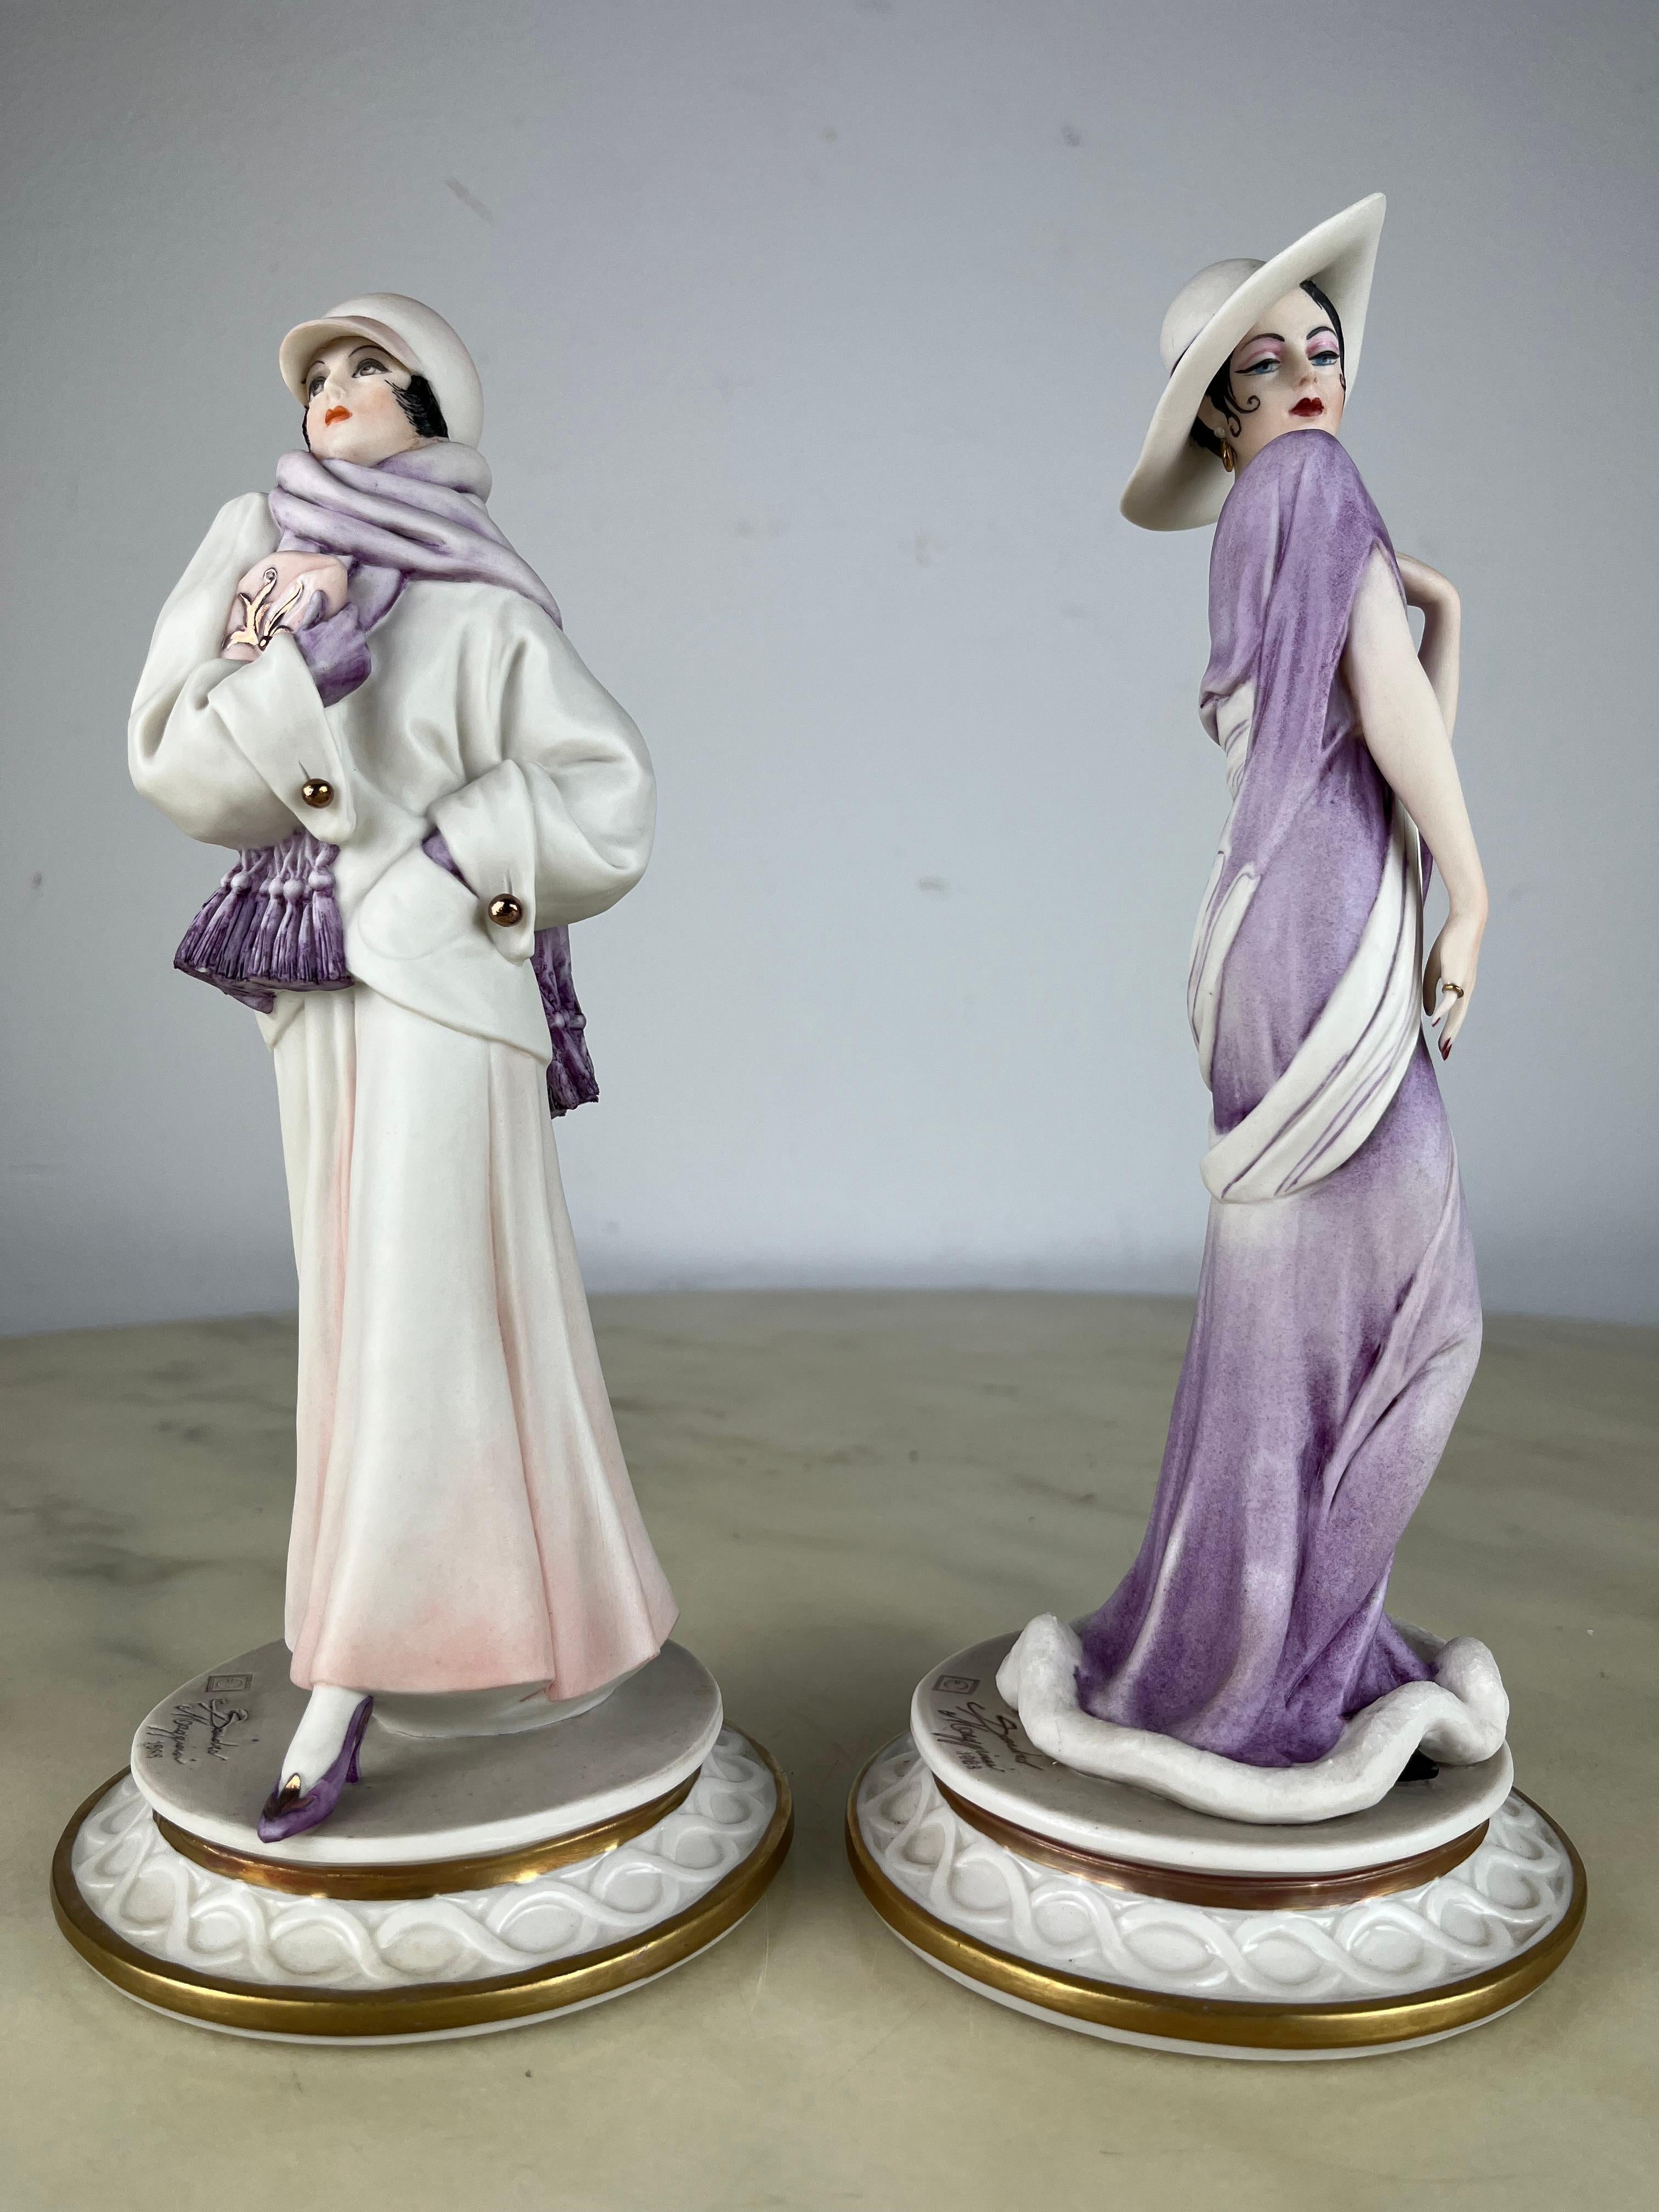 Other Set of 2 Capodimonte Figurines by Sandro Maggioni, Italy, 1980s For Sale